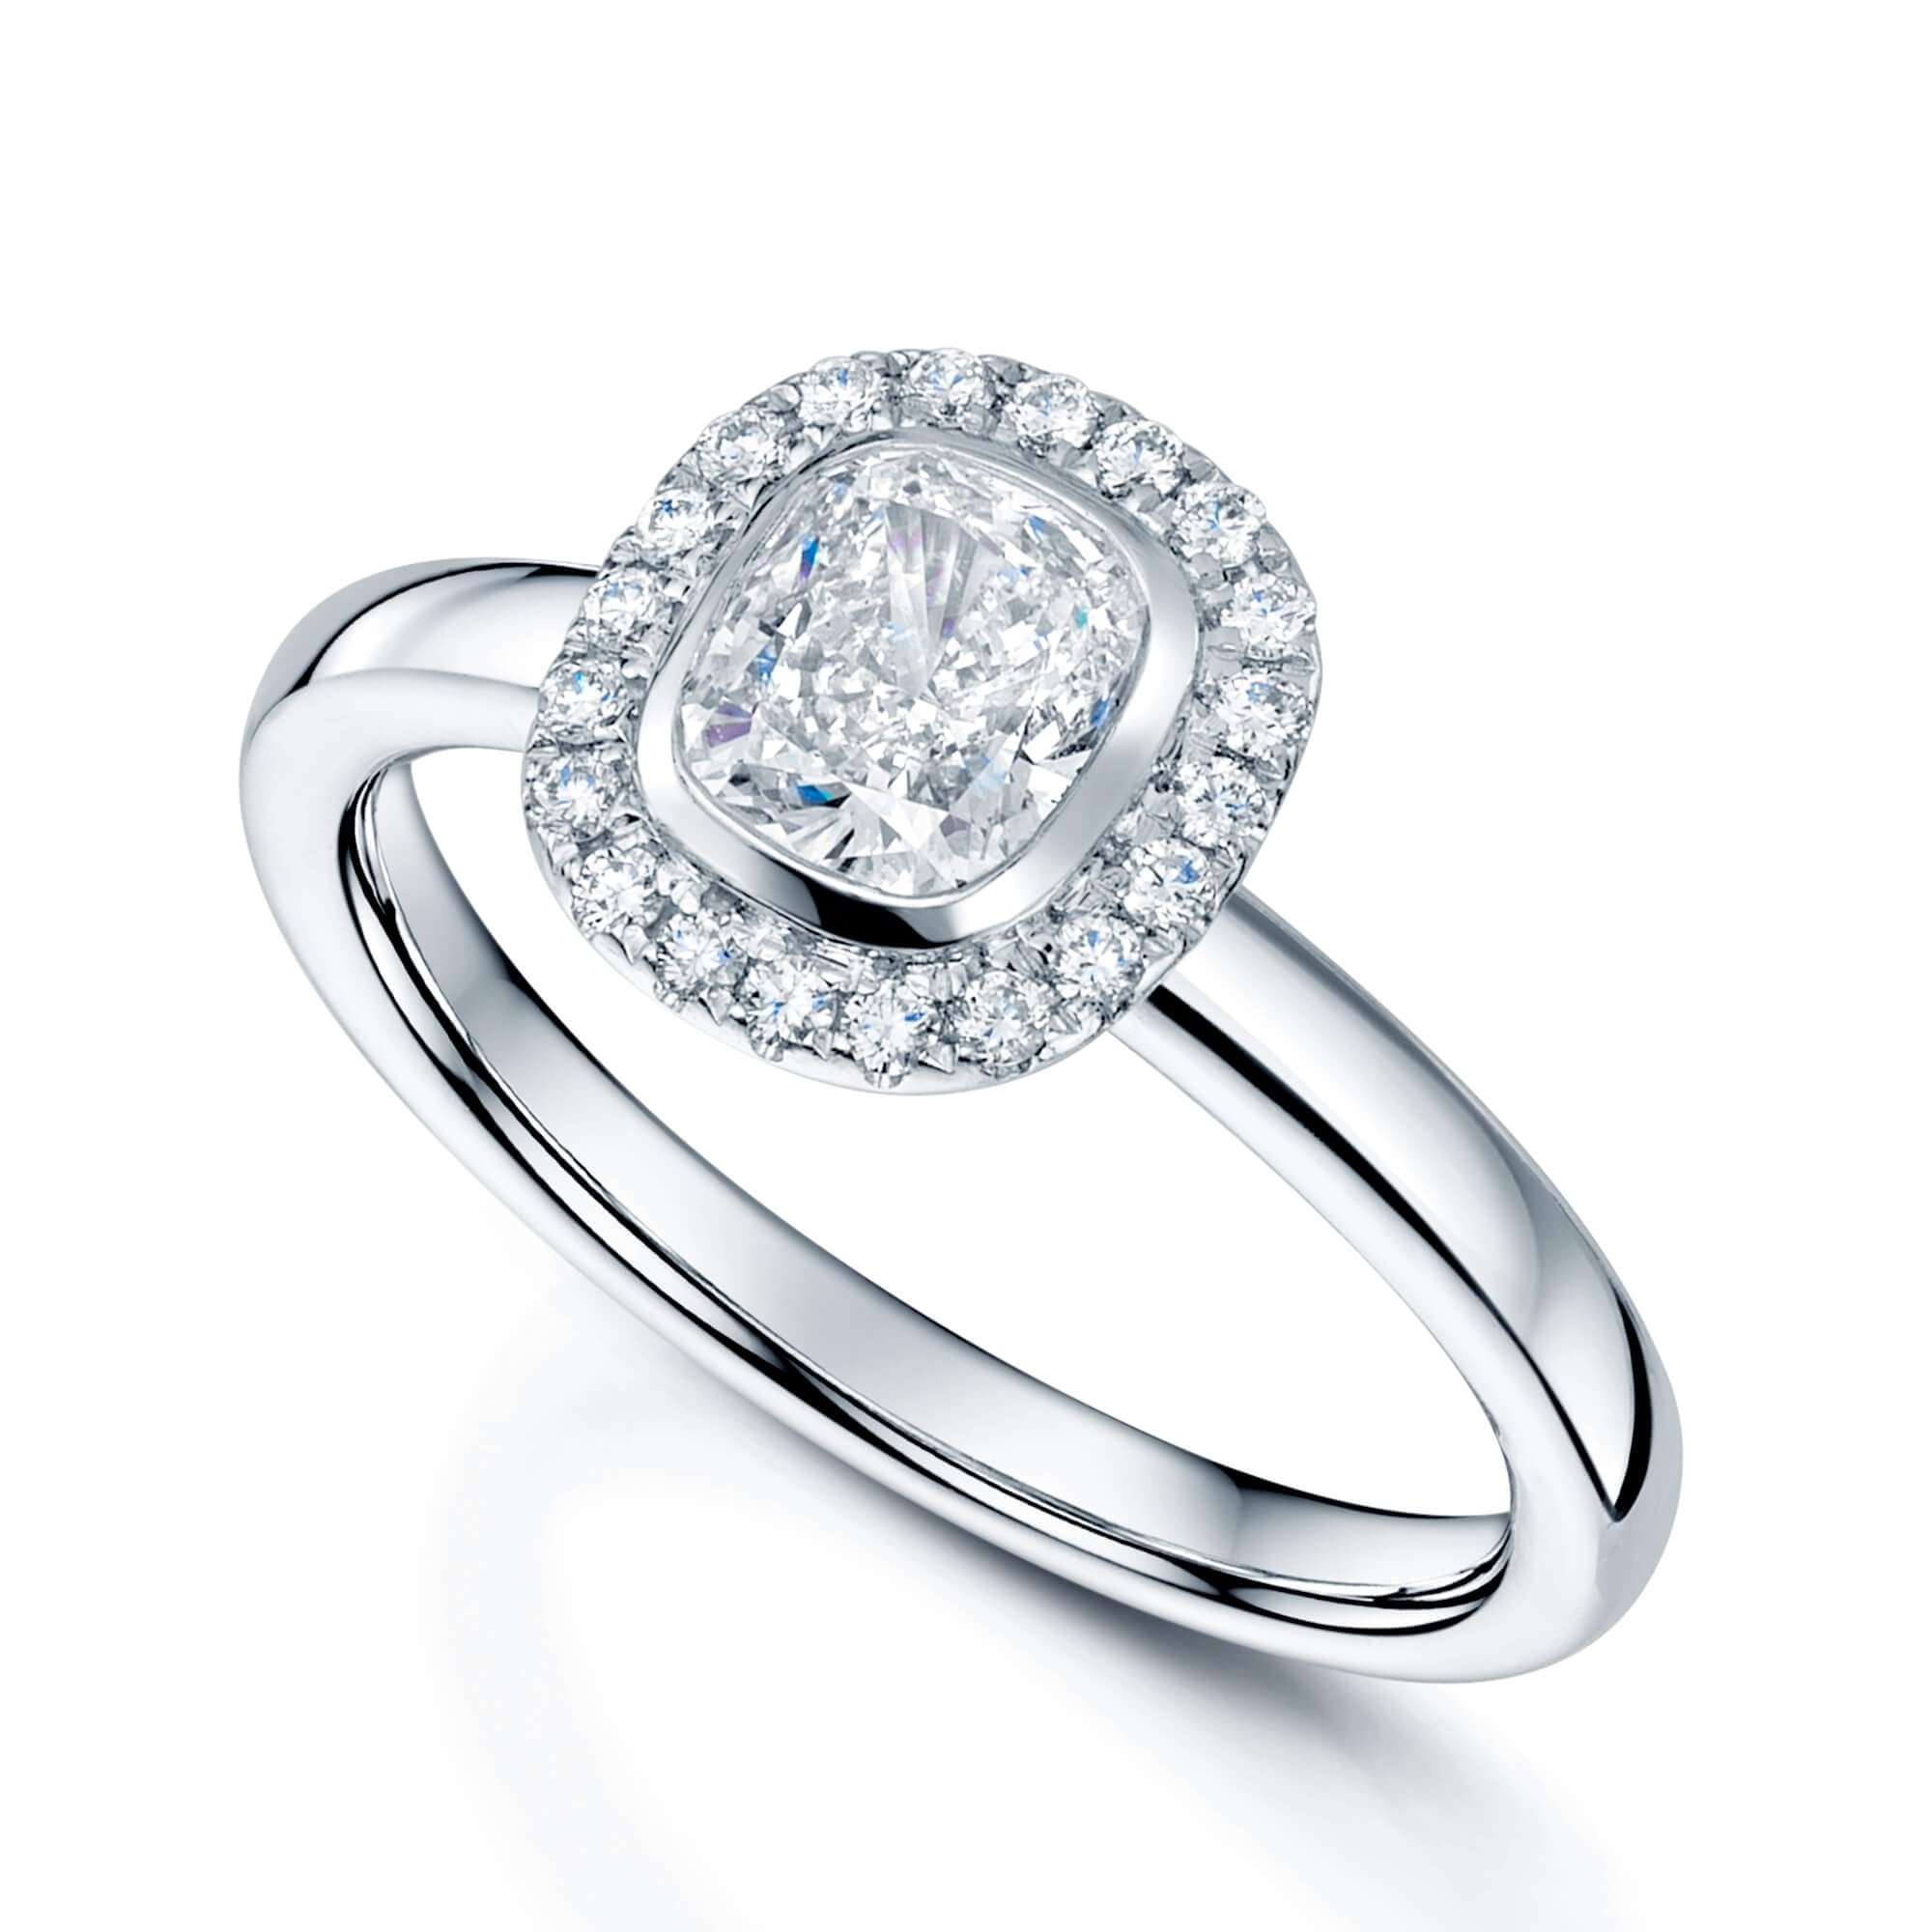 Platinum GIA Certificated Cushion Cut Diamond Halo Ring With A Rub Over Centre